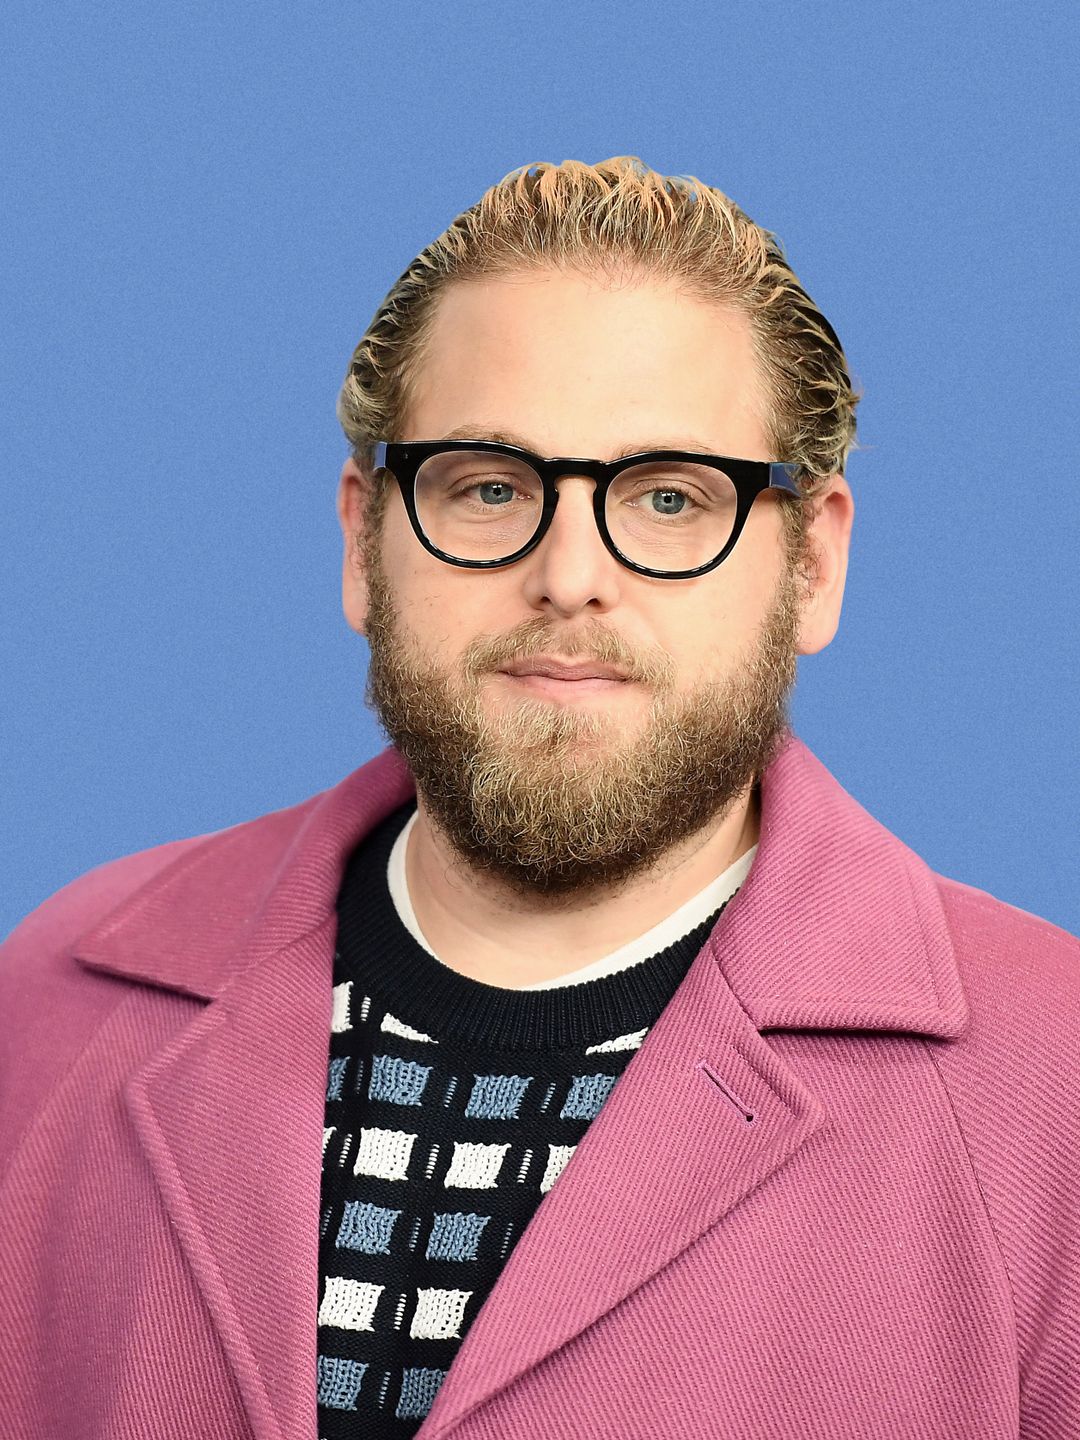 Jonah Hill in his youth